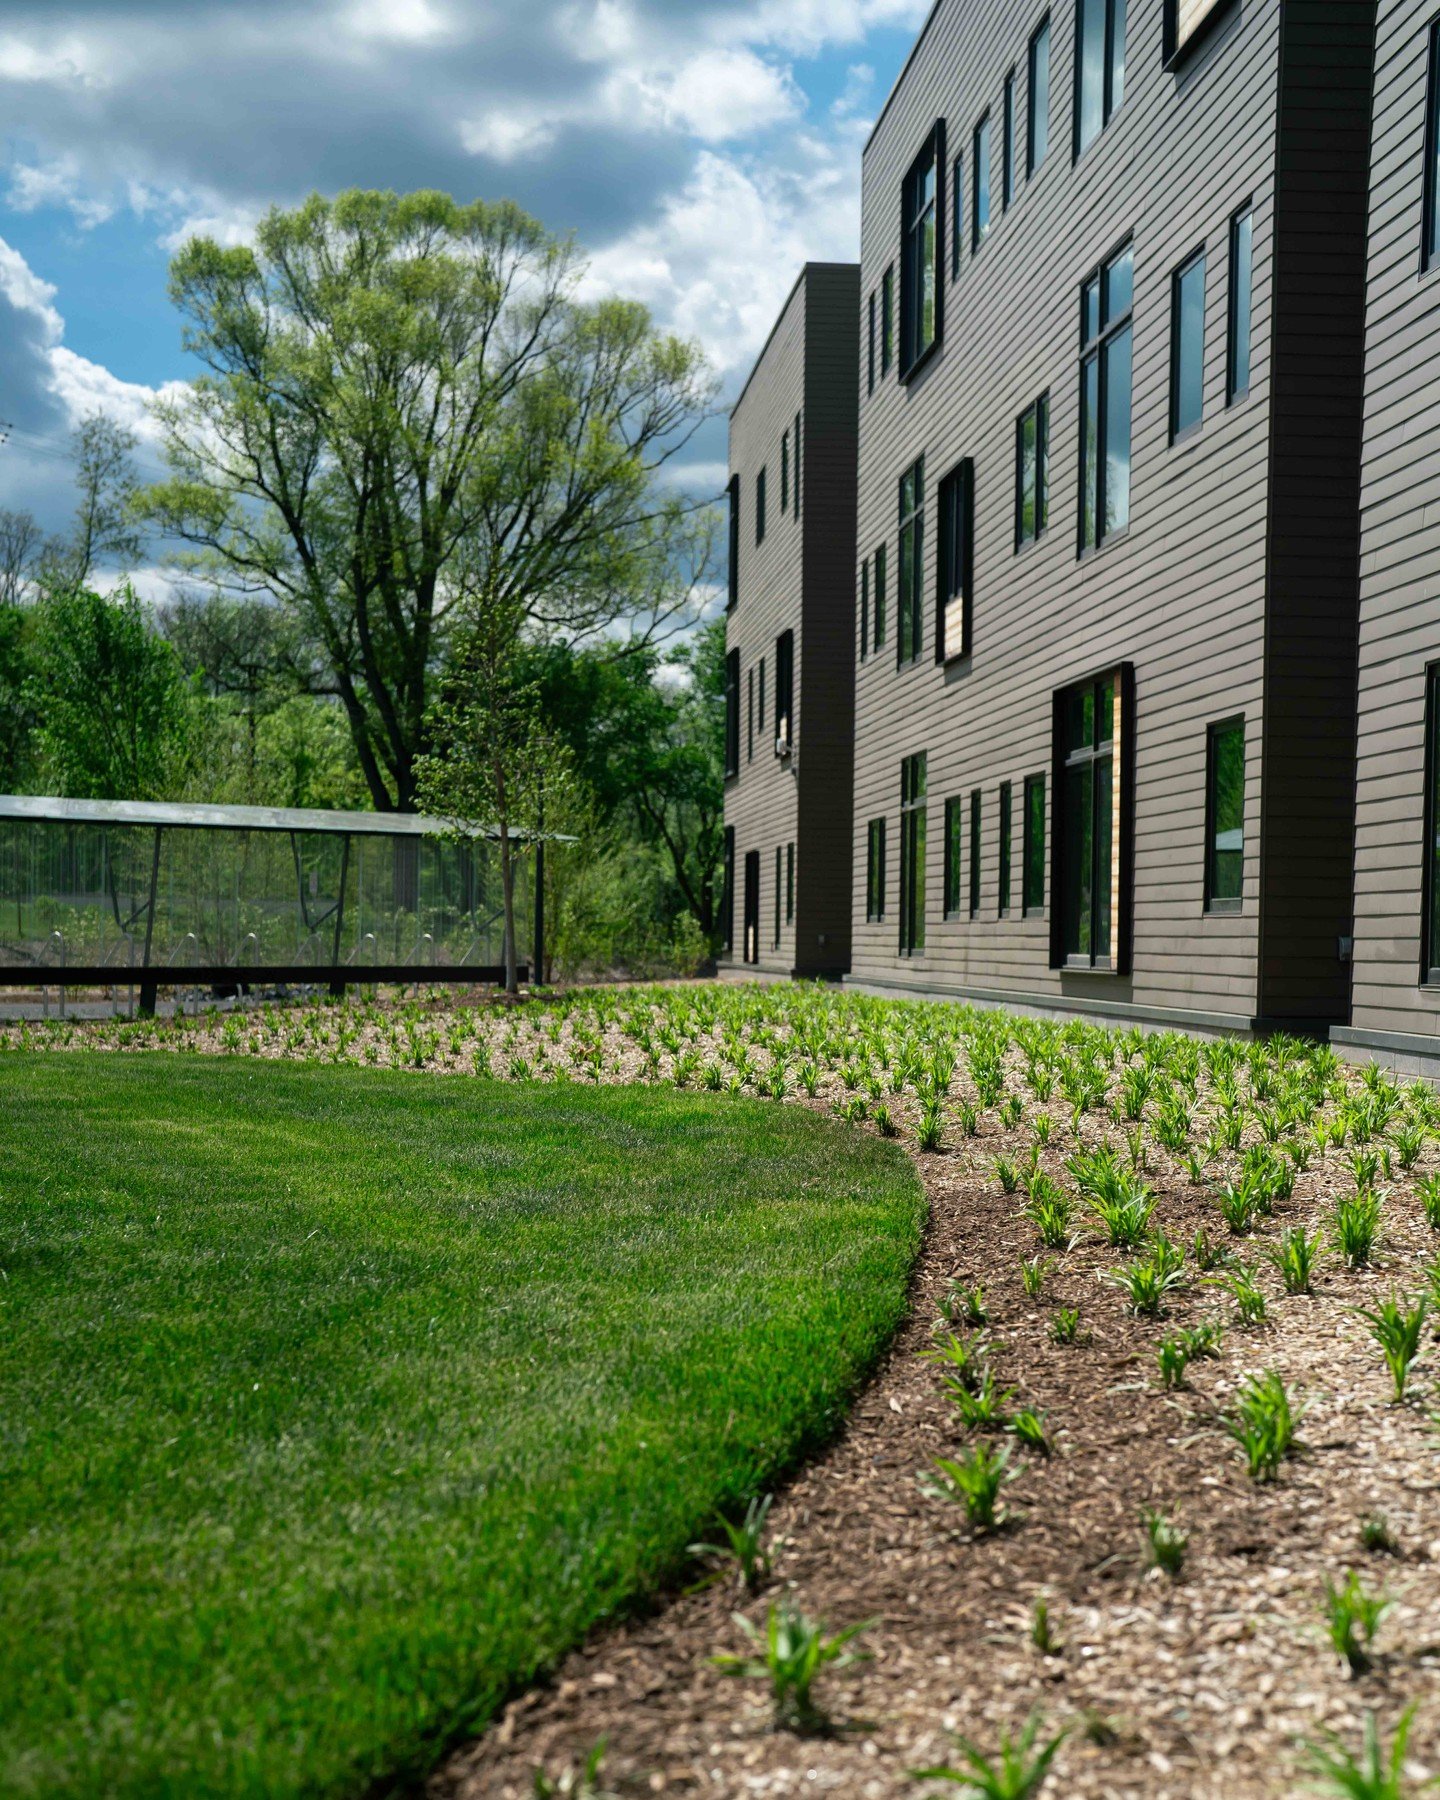 Liriopes deliver a polished and professional look to any landscape! #MayfieldGardens

#landscaping #landscapeslovers #landscapedesign #plants #nursery #mainline #philadelphia #trees